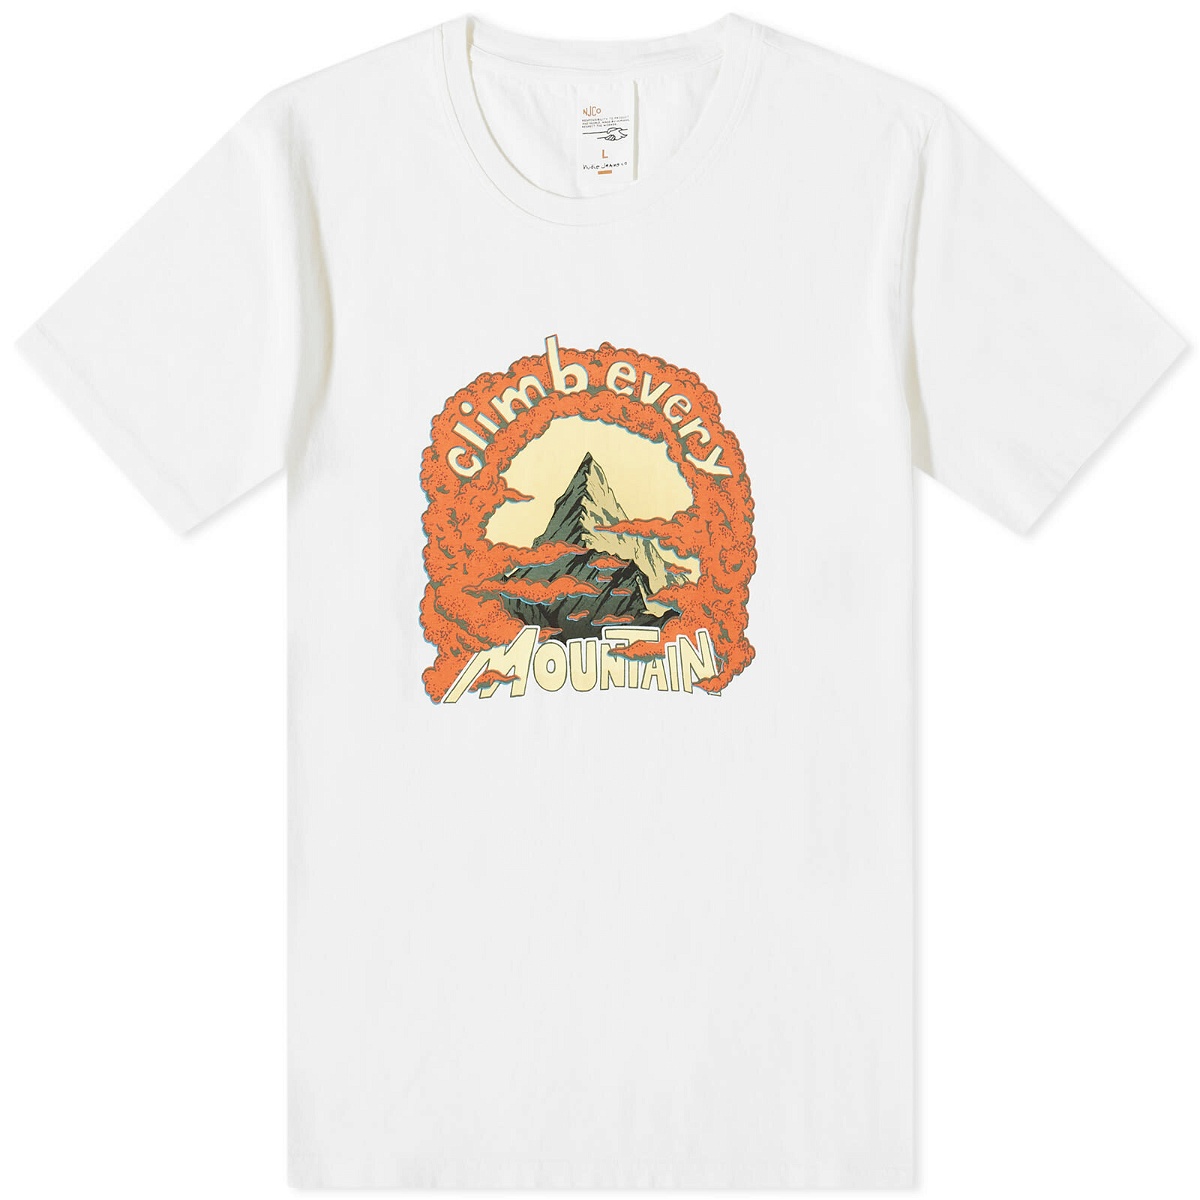 Photo: Nudie Jeans Co Men's Nudie Roy Every Mountain T-Shirt in Chalk White